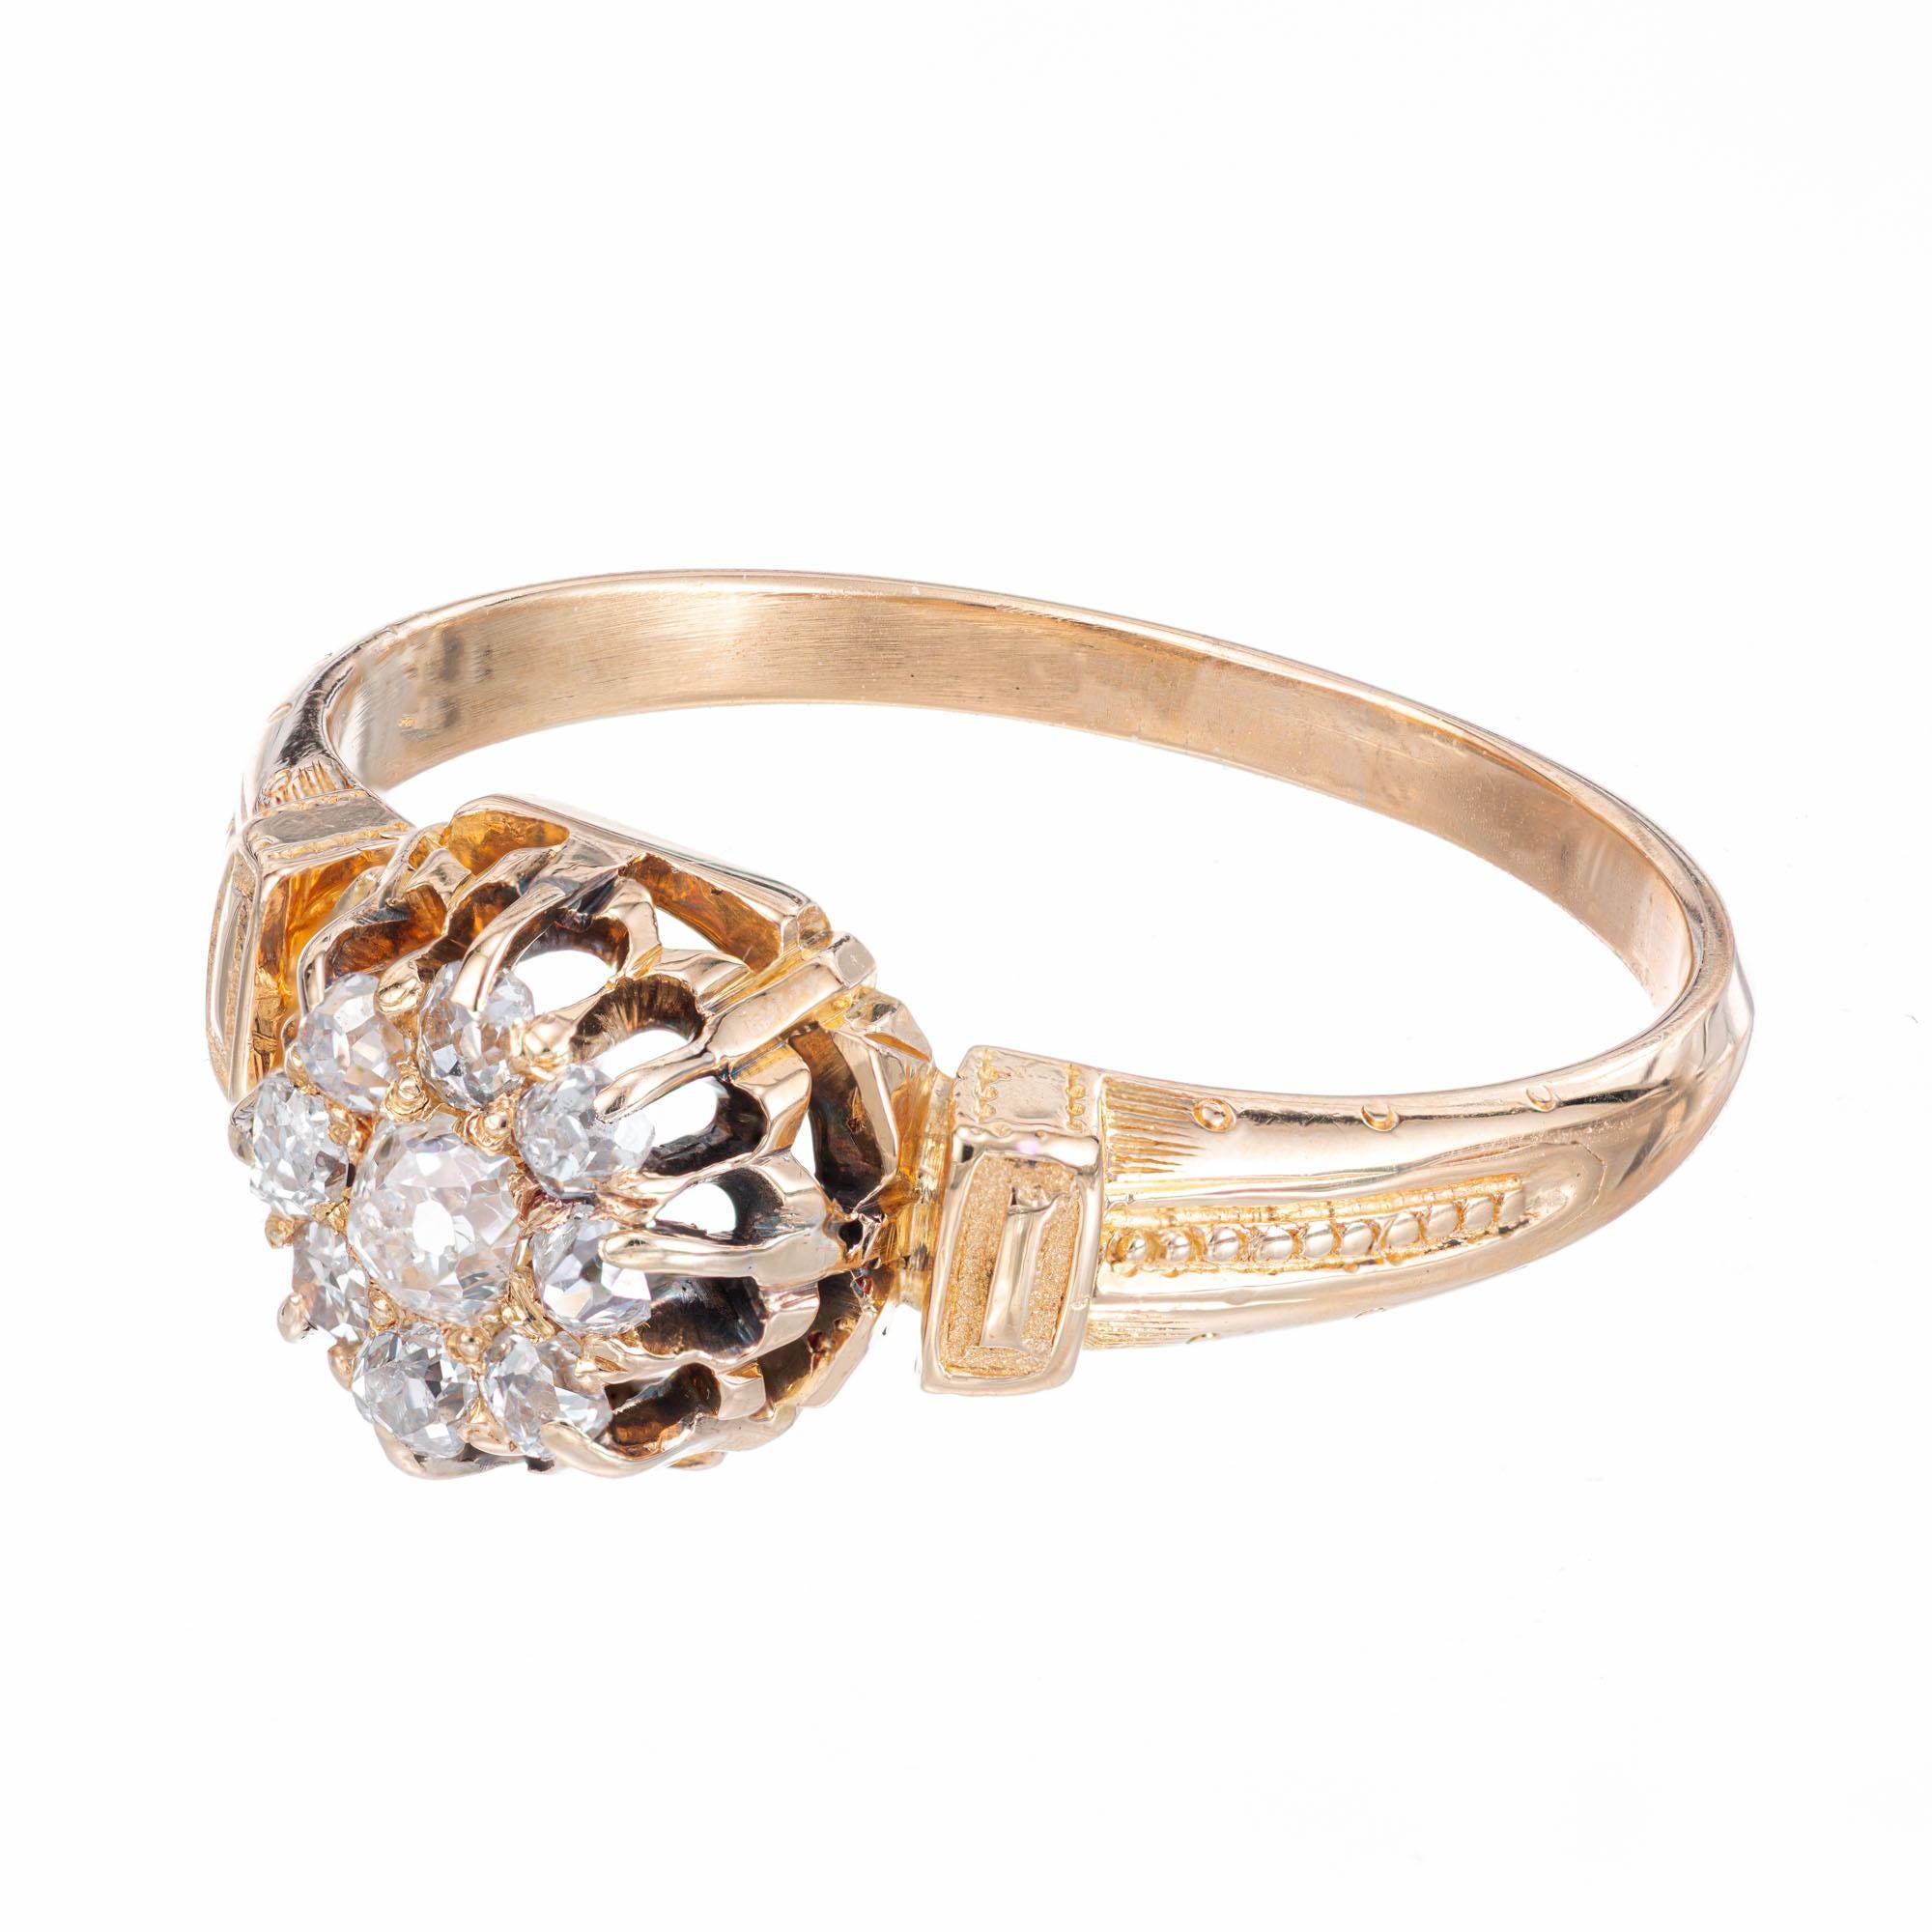 1840's Georgian cluster diamond engagement ring. 9 old mind diamonds set in a 14k yellow gold handmade setting.

9 Old Mine cut diamonds, I VS-SI approx. .25cts
Size 7.75 and sizable 
14k yellow gold 
Tested: 14k
3.5 grams
Width at top: 8.4mm
Height